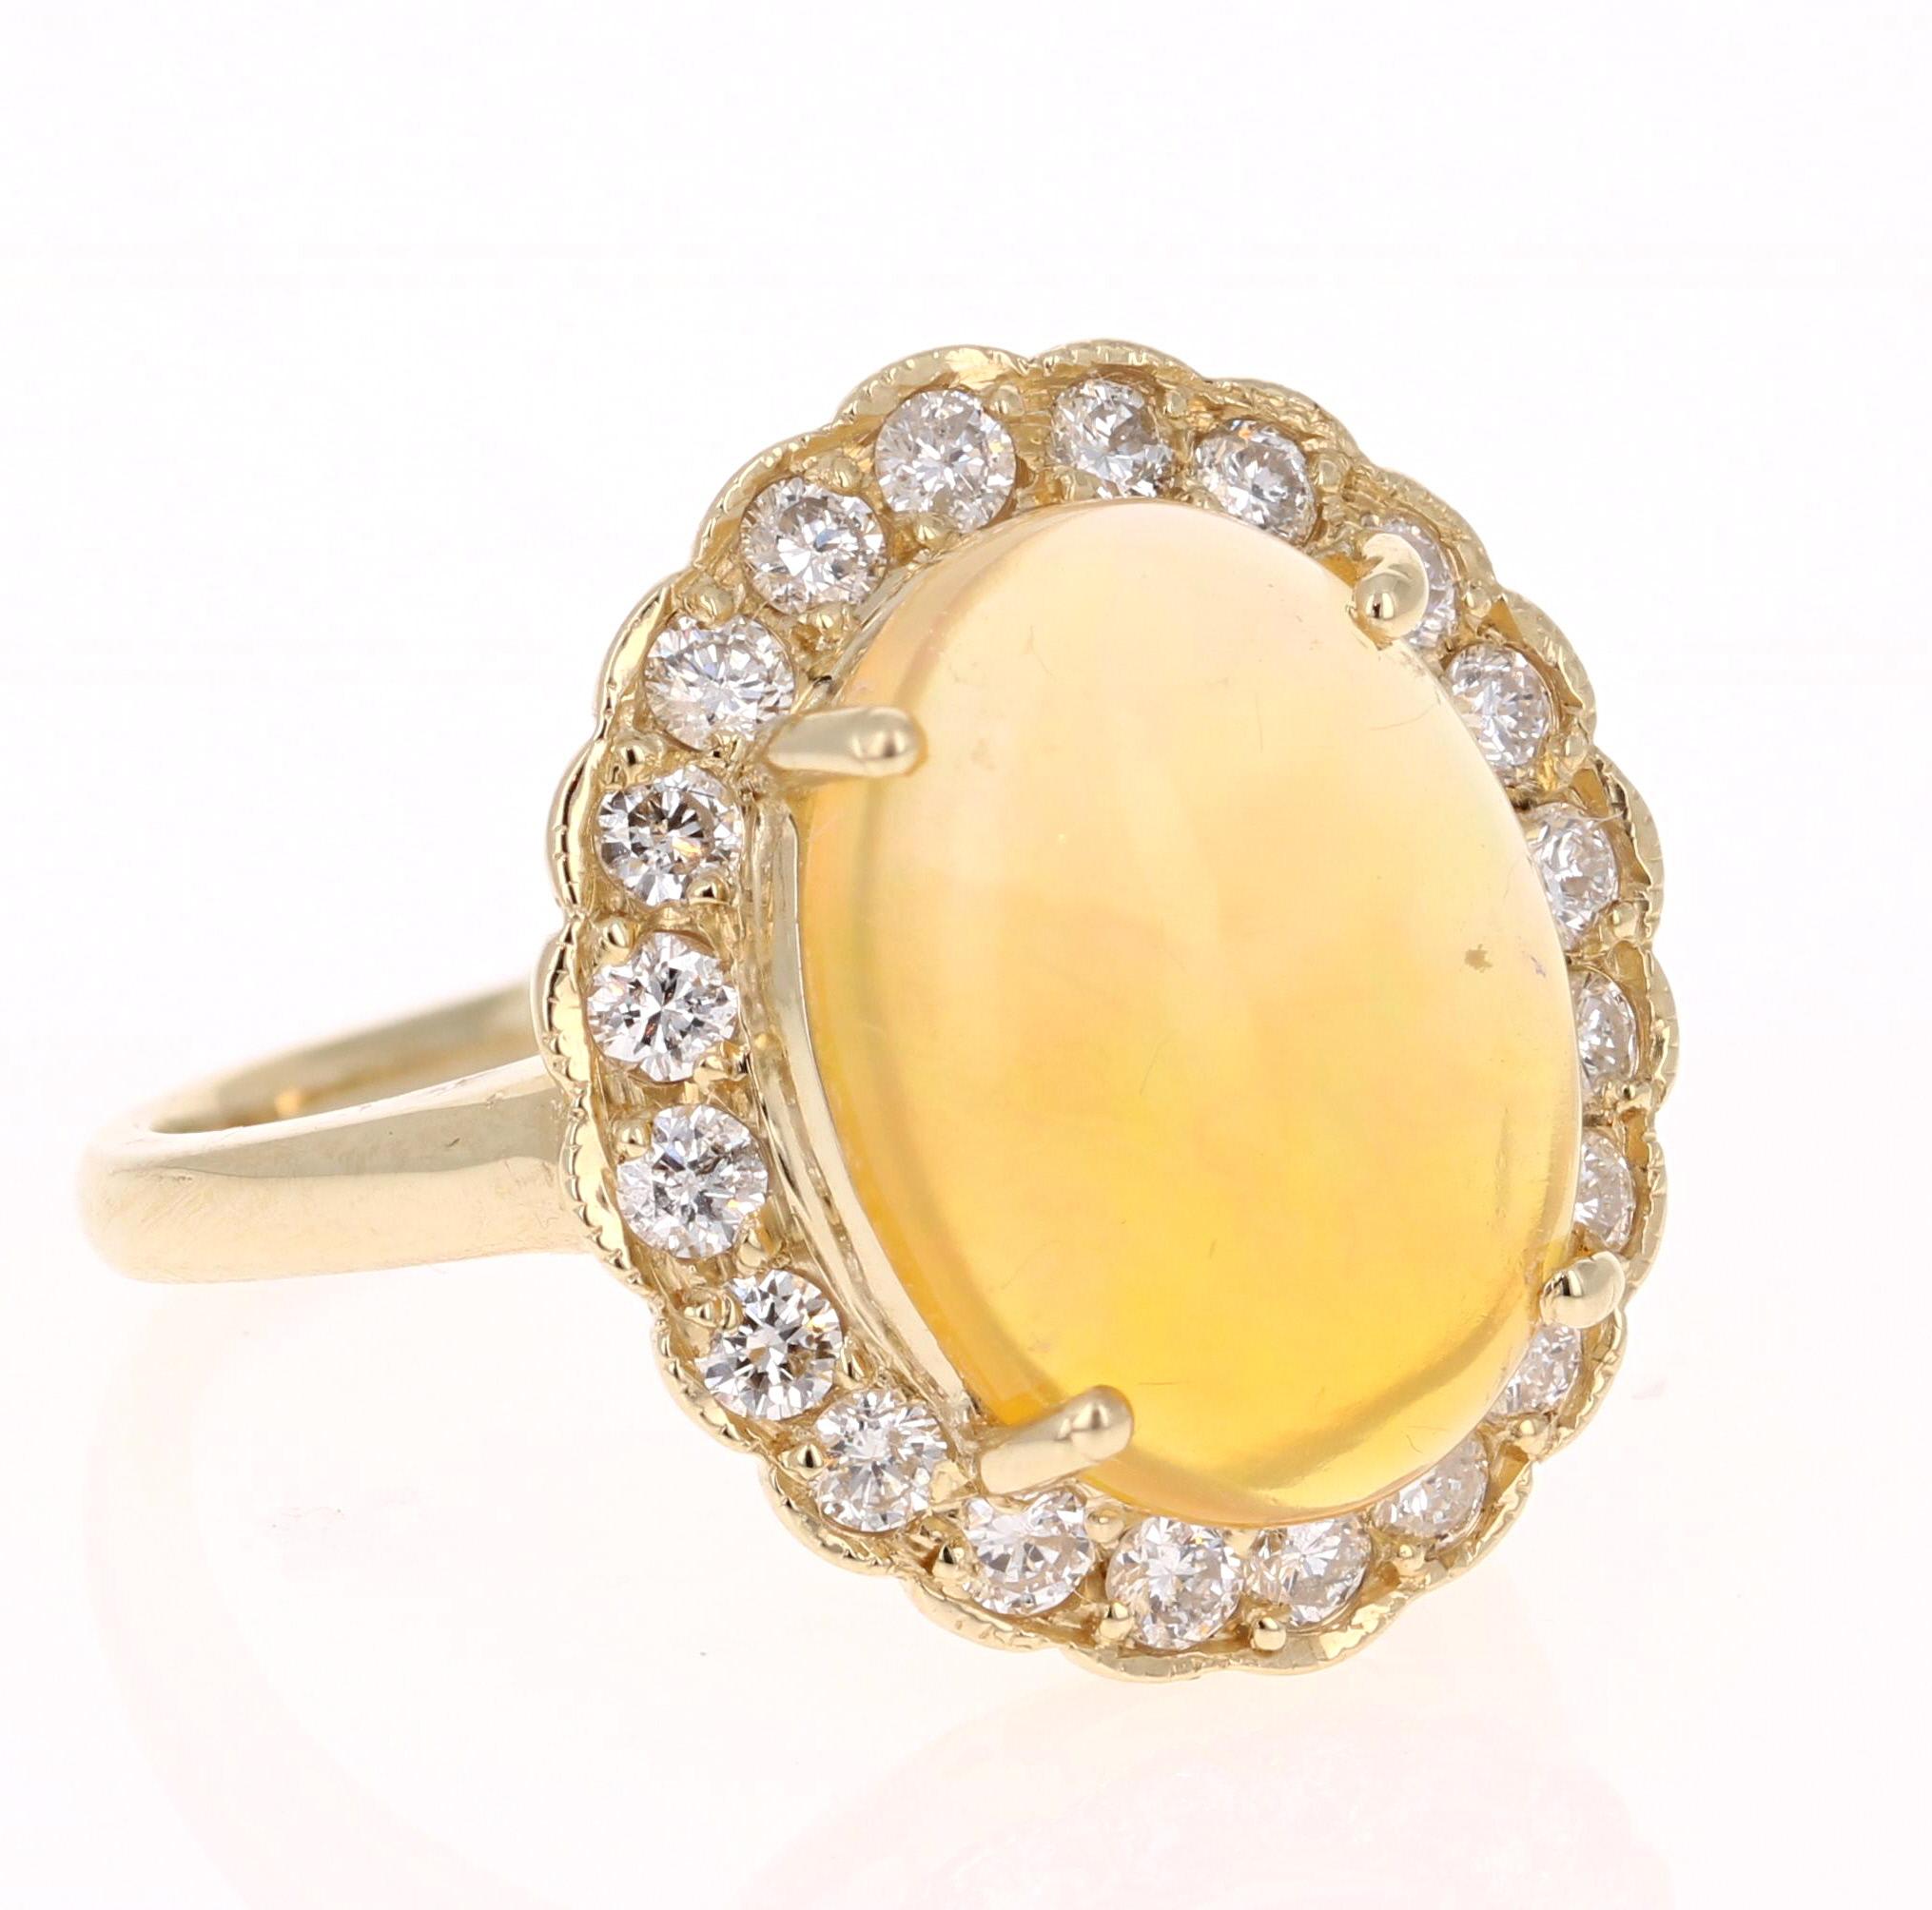 Stunning and extremely opulent 3.61 Carat Oval Cut Opal Diamond Yellow Gold Ring!

The Oval Cut Opal in this Ring weighs 3.24 carats and it is surrounded by 20 Round Cut Diamonds that weigh 0.37 carats.  The total carat weight of this ring is 3.61